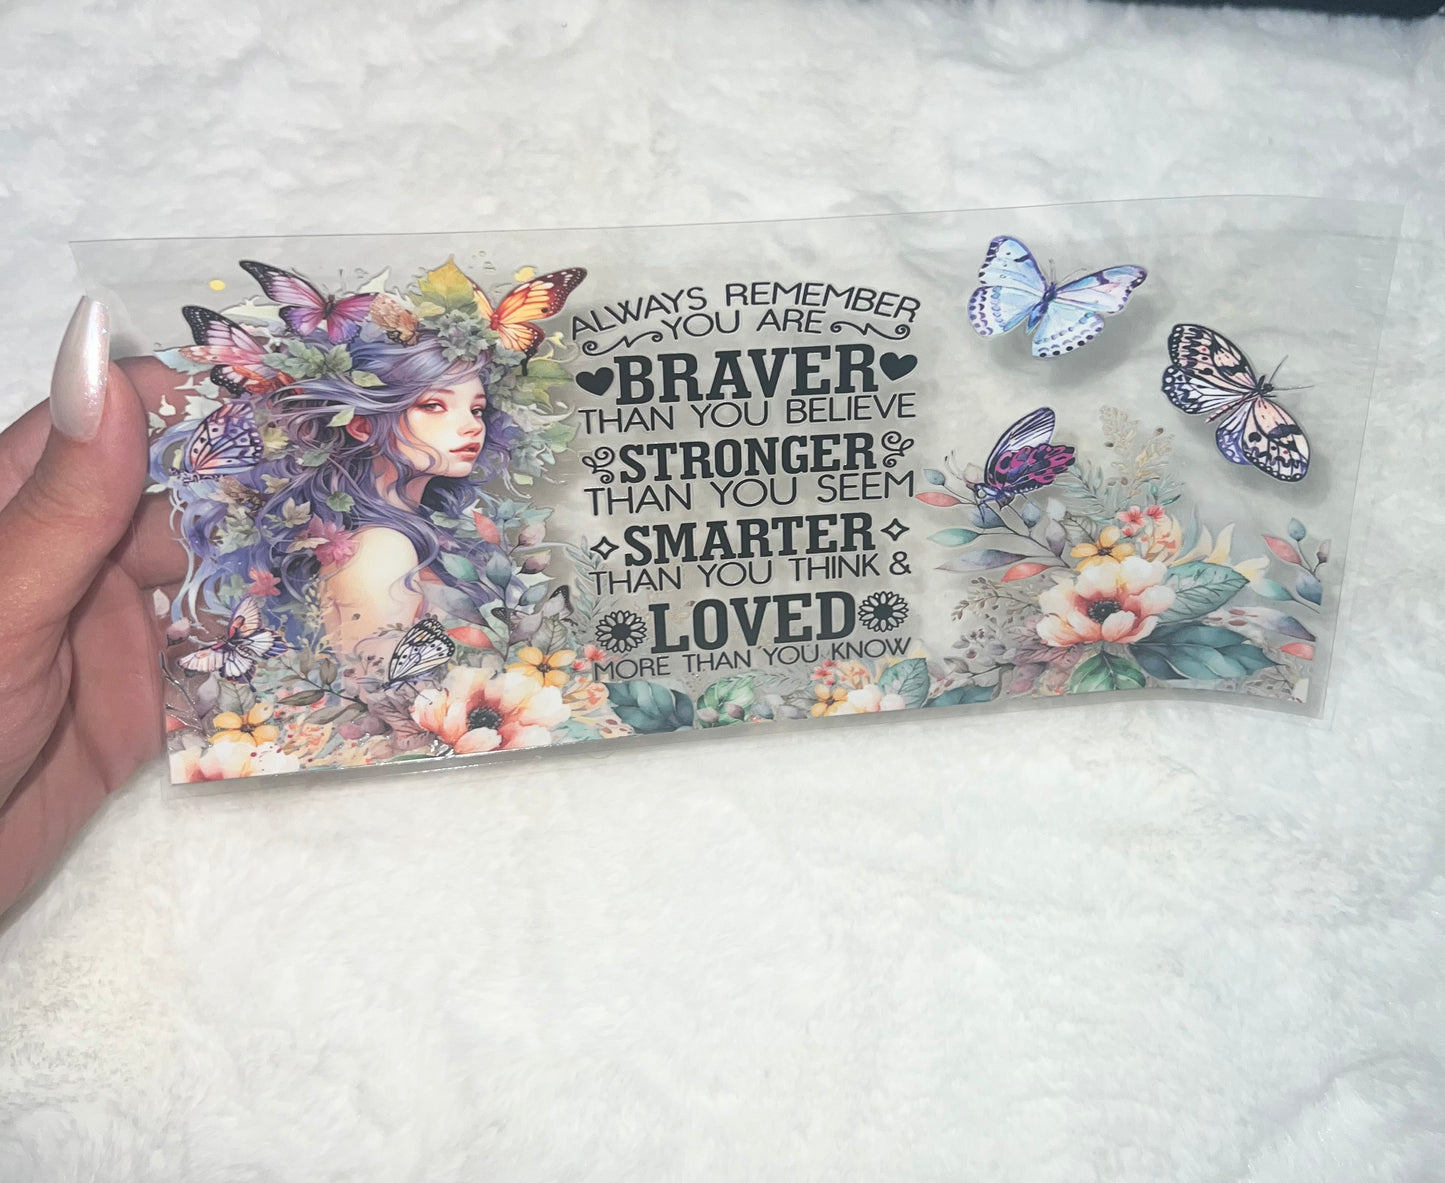 You are braver stronger Smarter loved butterfkt floral girl 16oz Libbey Glass Can Ready to apply | UVDTF #375